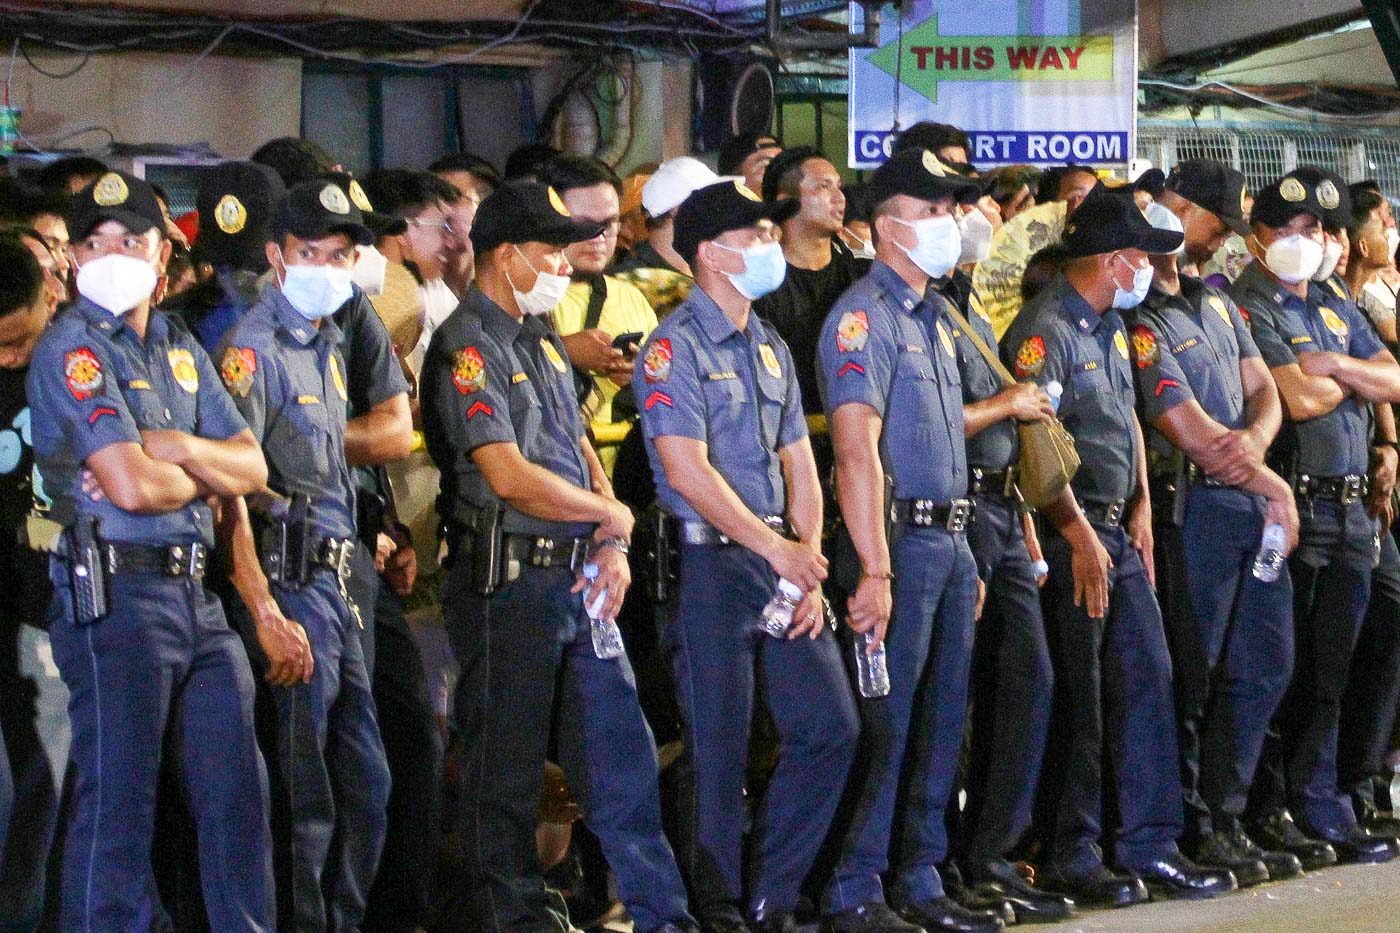 Cebu City crime volume drops even with reopened economy